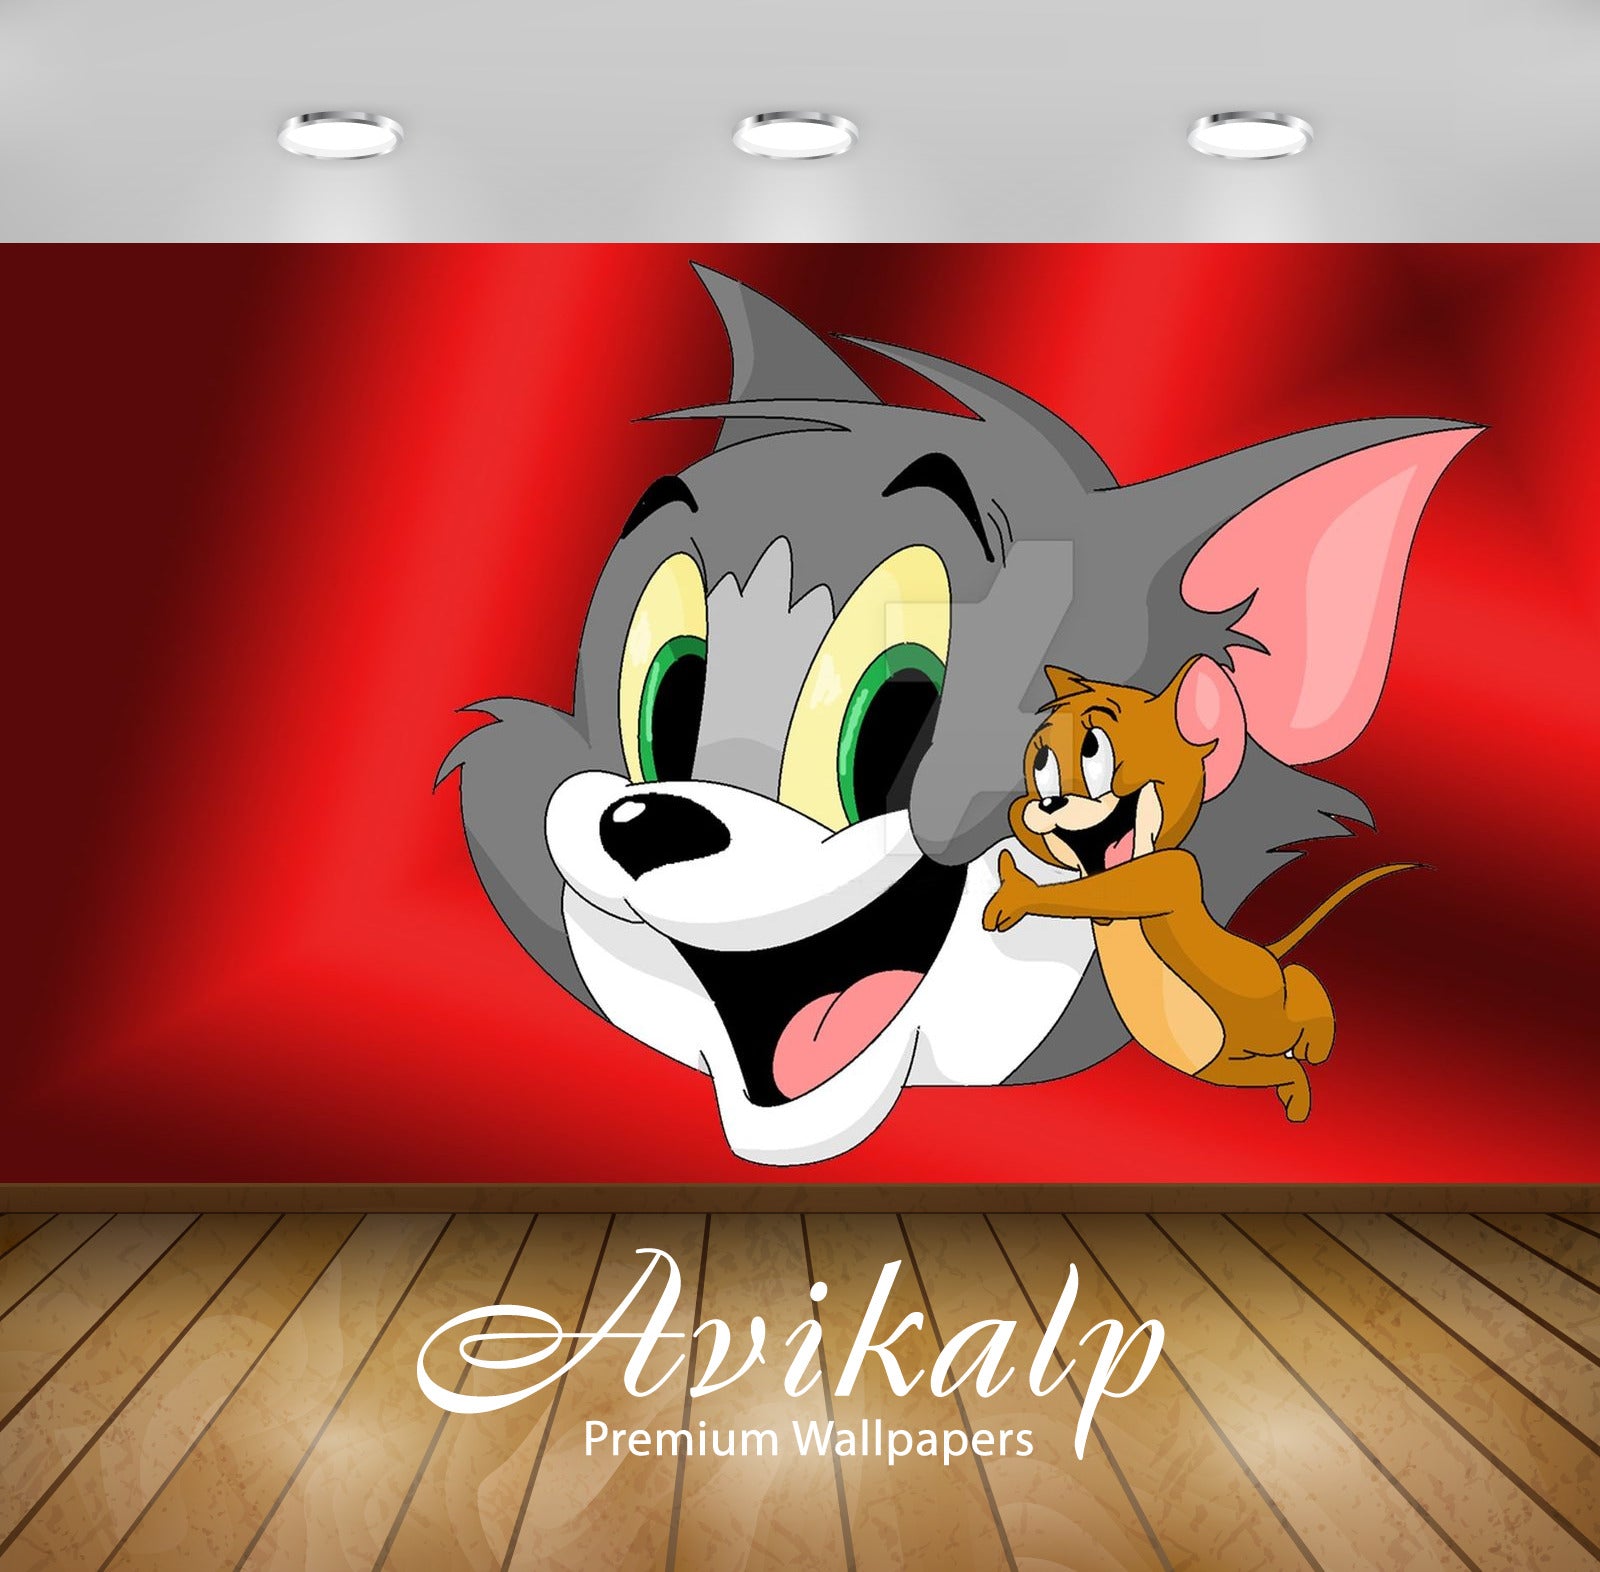 Avikalp Exclusive Awi2272 Tom and Jerry picture close ups Full HD Wallpapers for Living room, Hall,